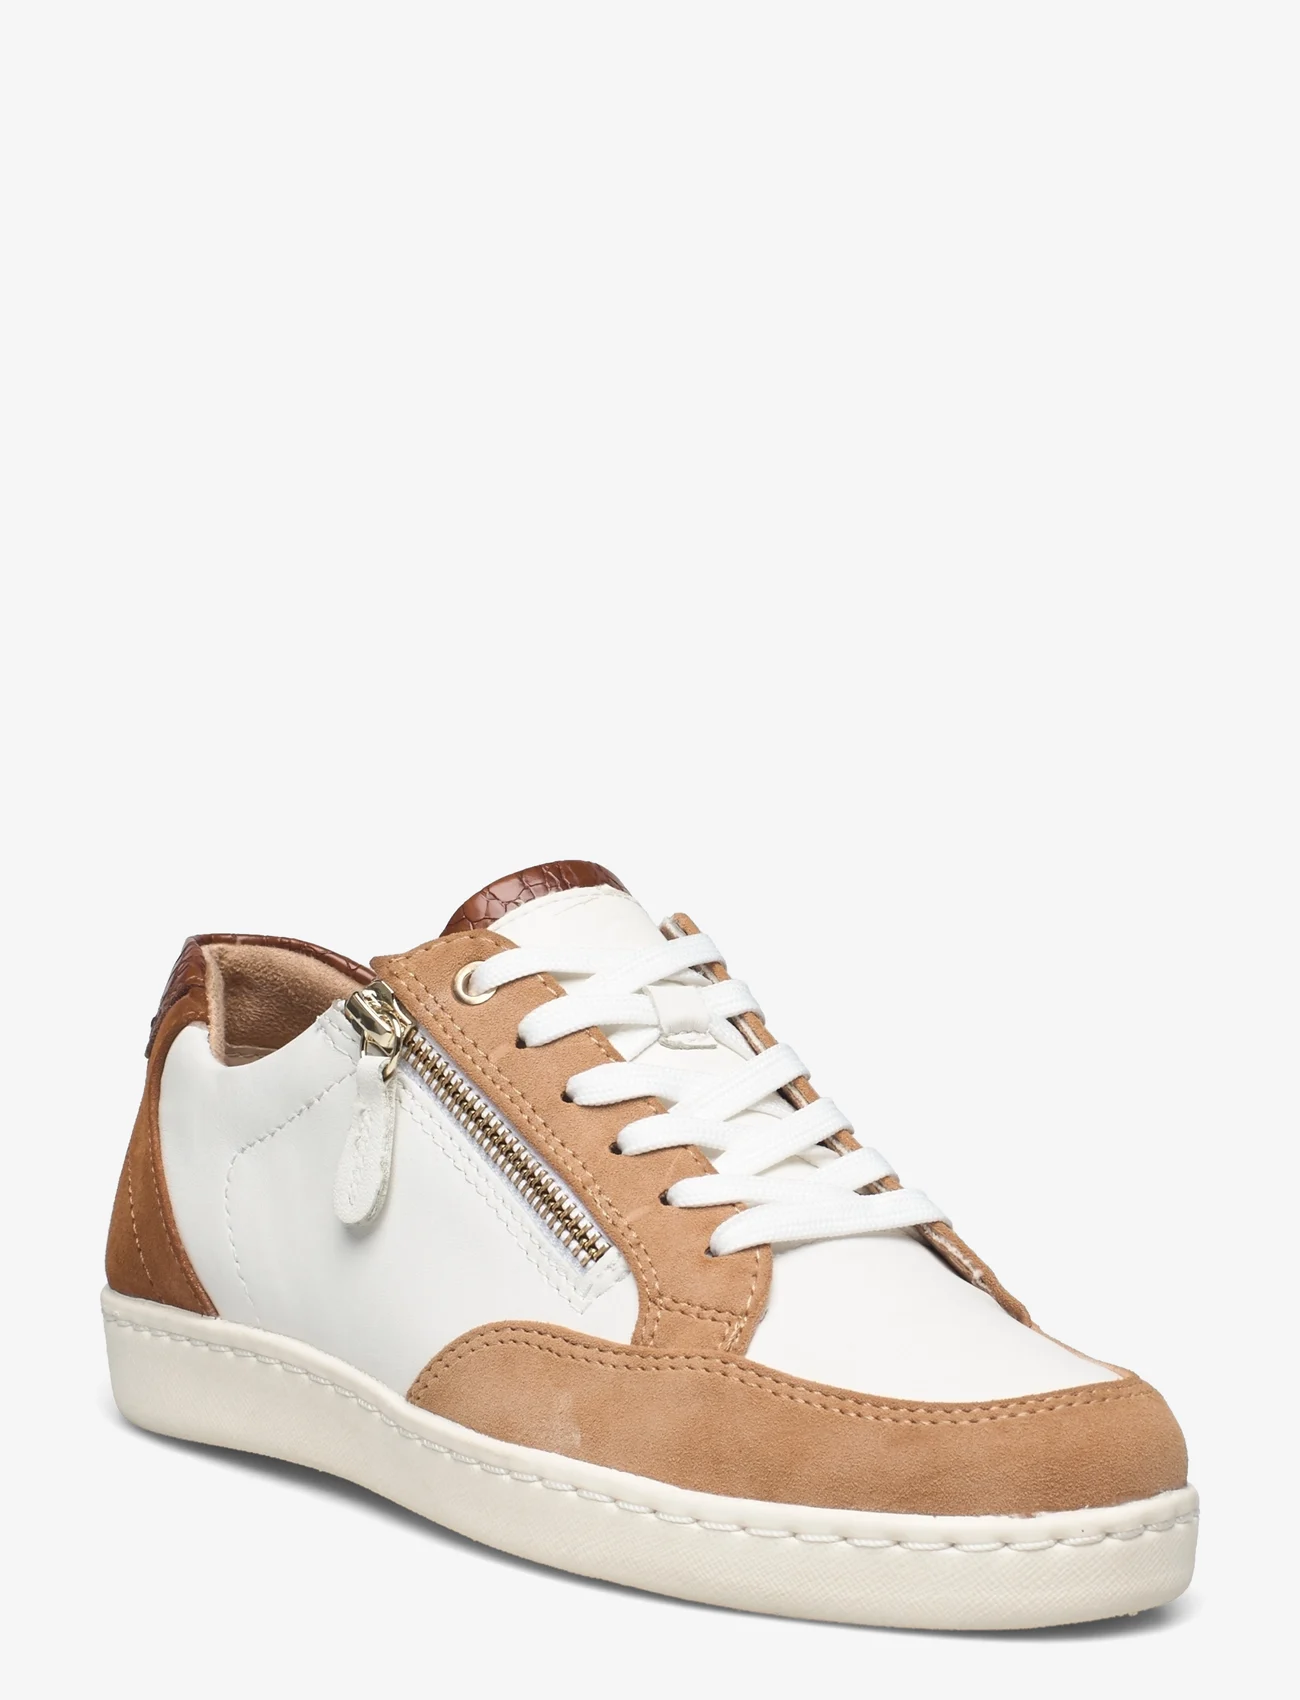 Tamaris - Woms Lace-up - sneakersy niskie - wht/almond com - 0